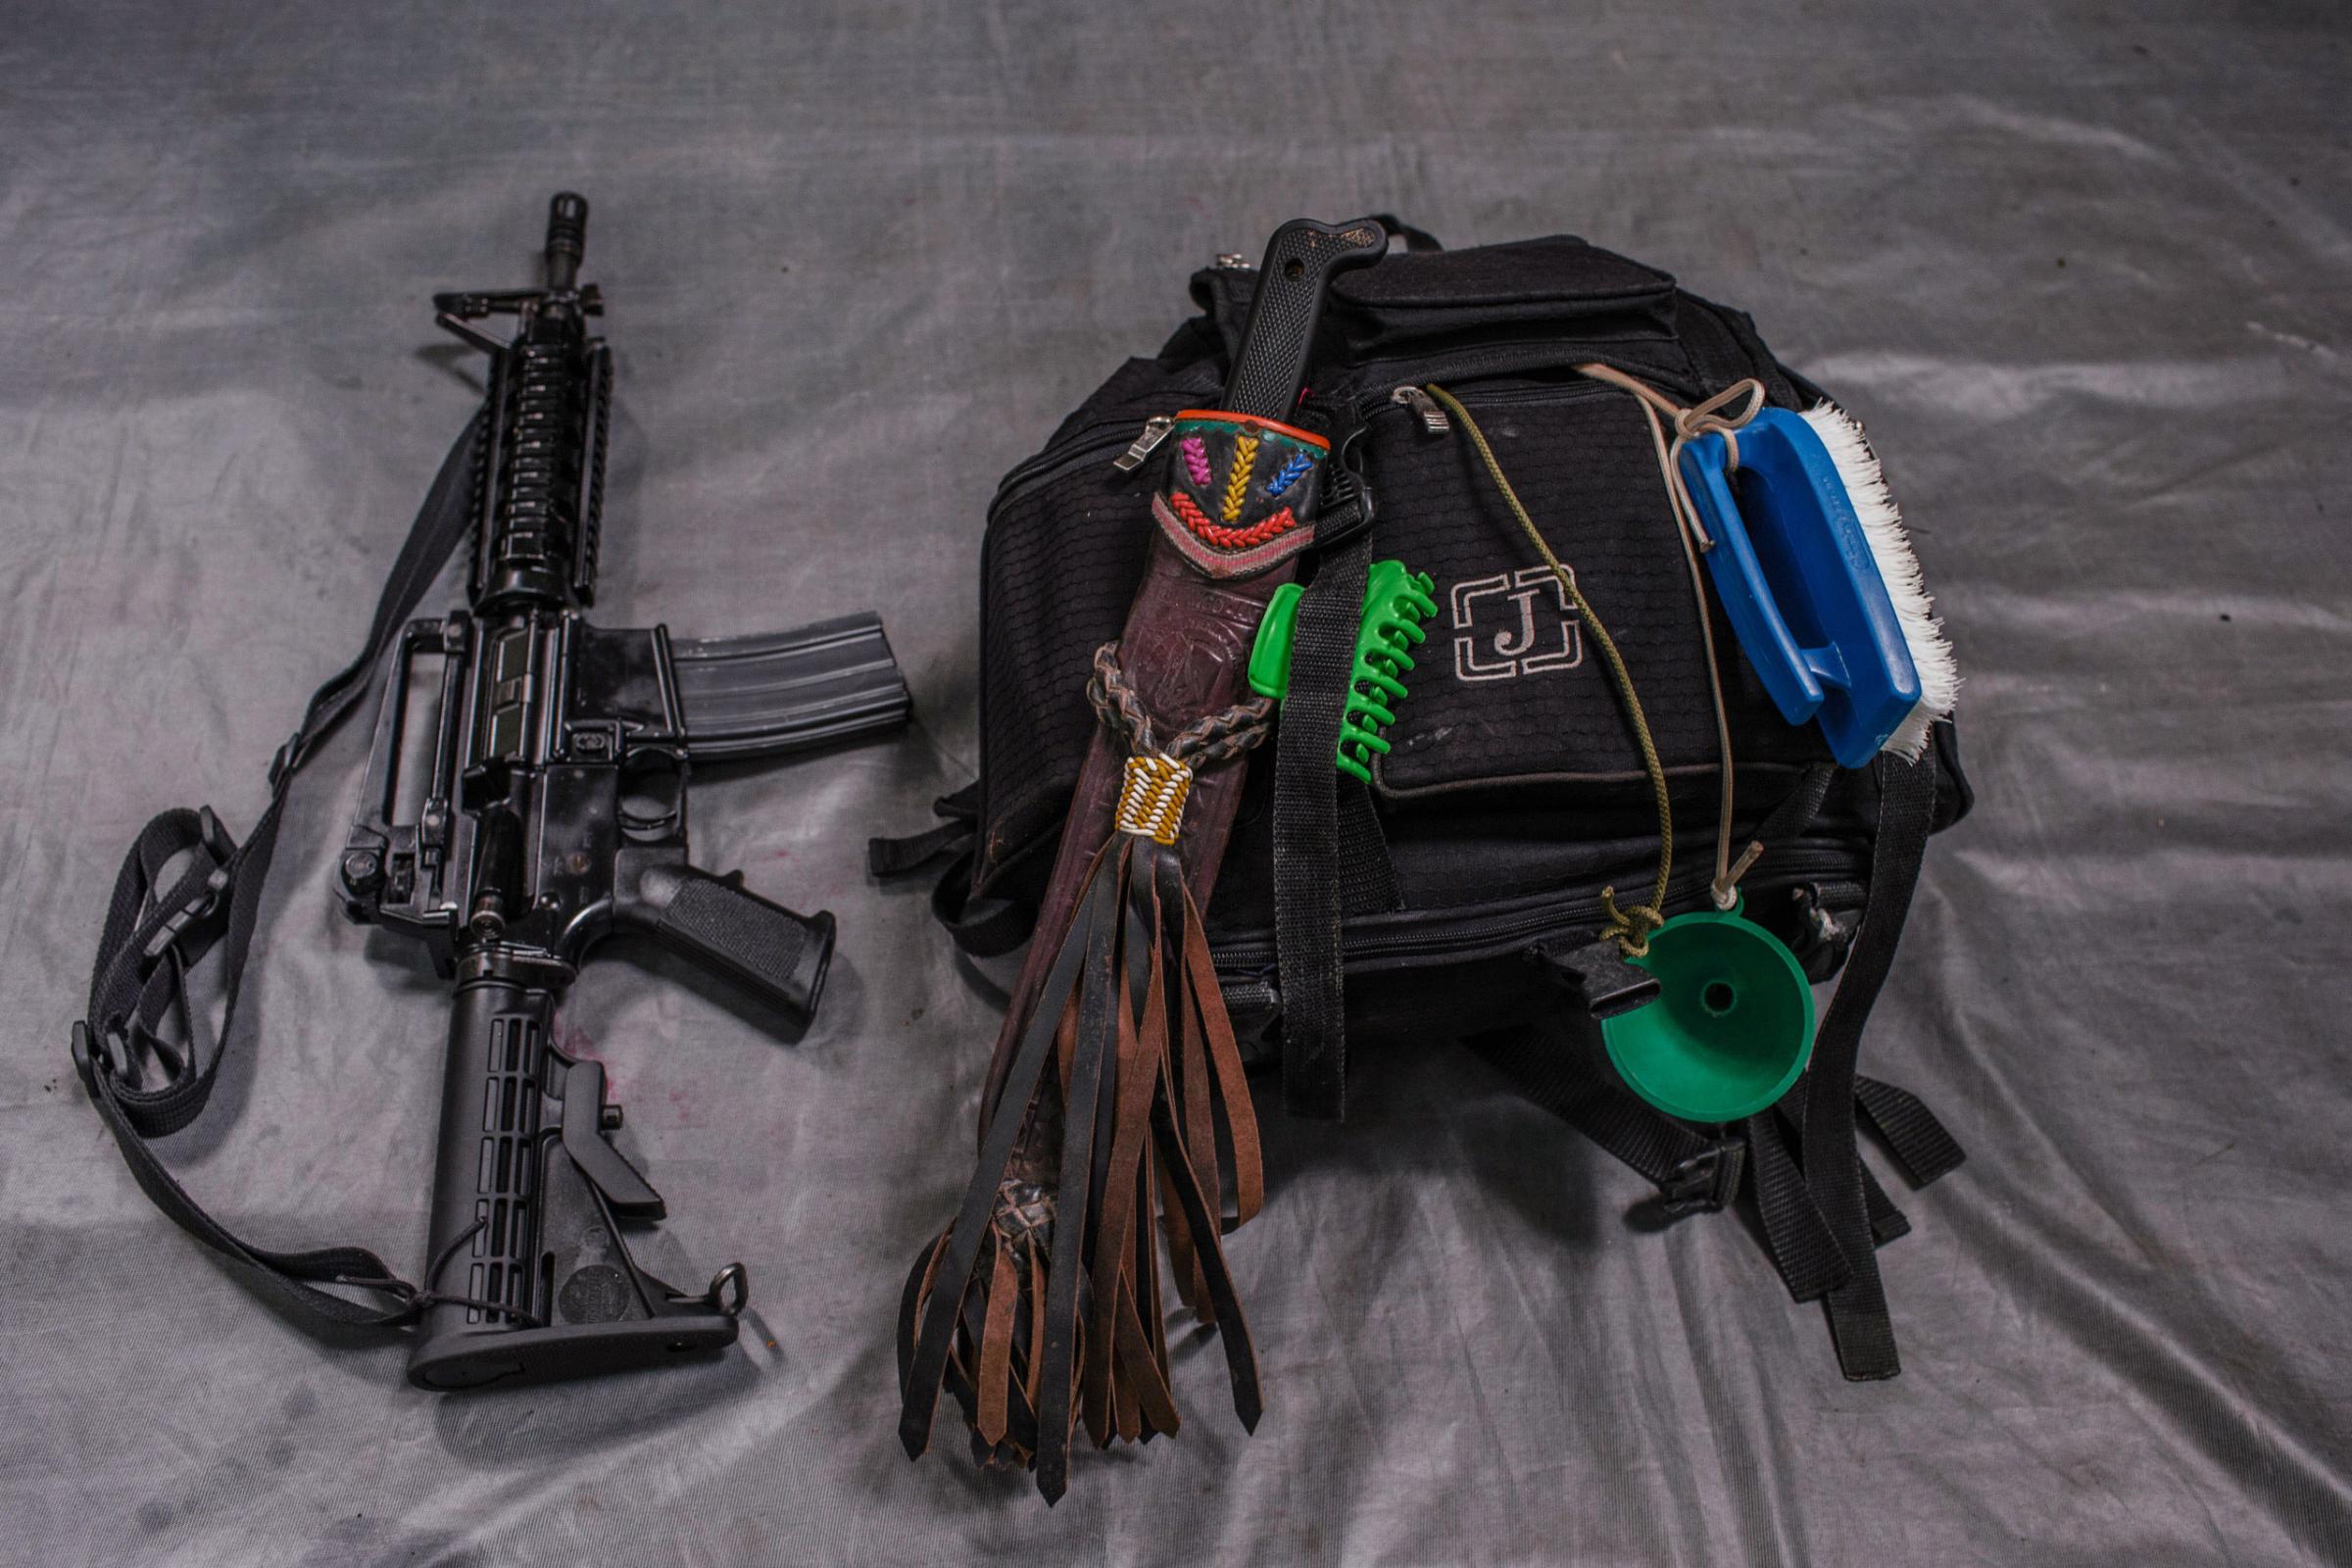 The backpack and M15 rifle that belong to "Glodis", a 33-year old who has been a FARC member for 19 years. She uses the  brush attached to her bag to wash clothes.